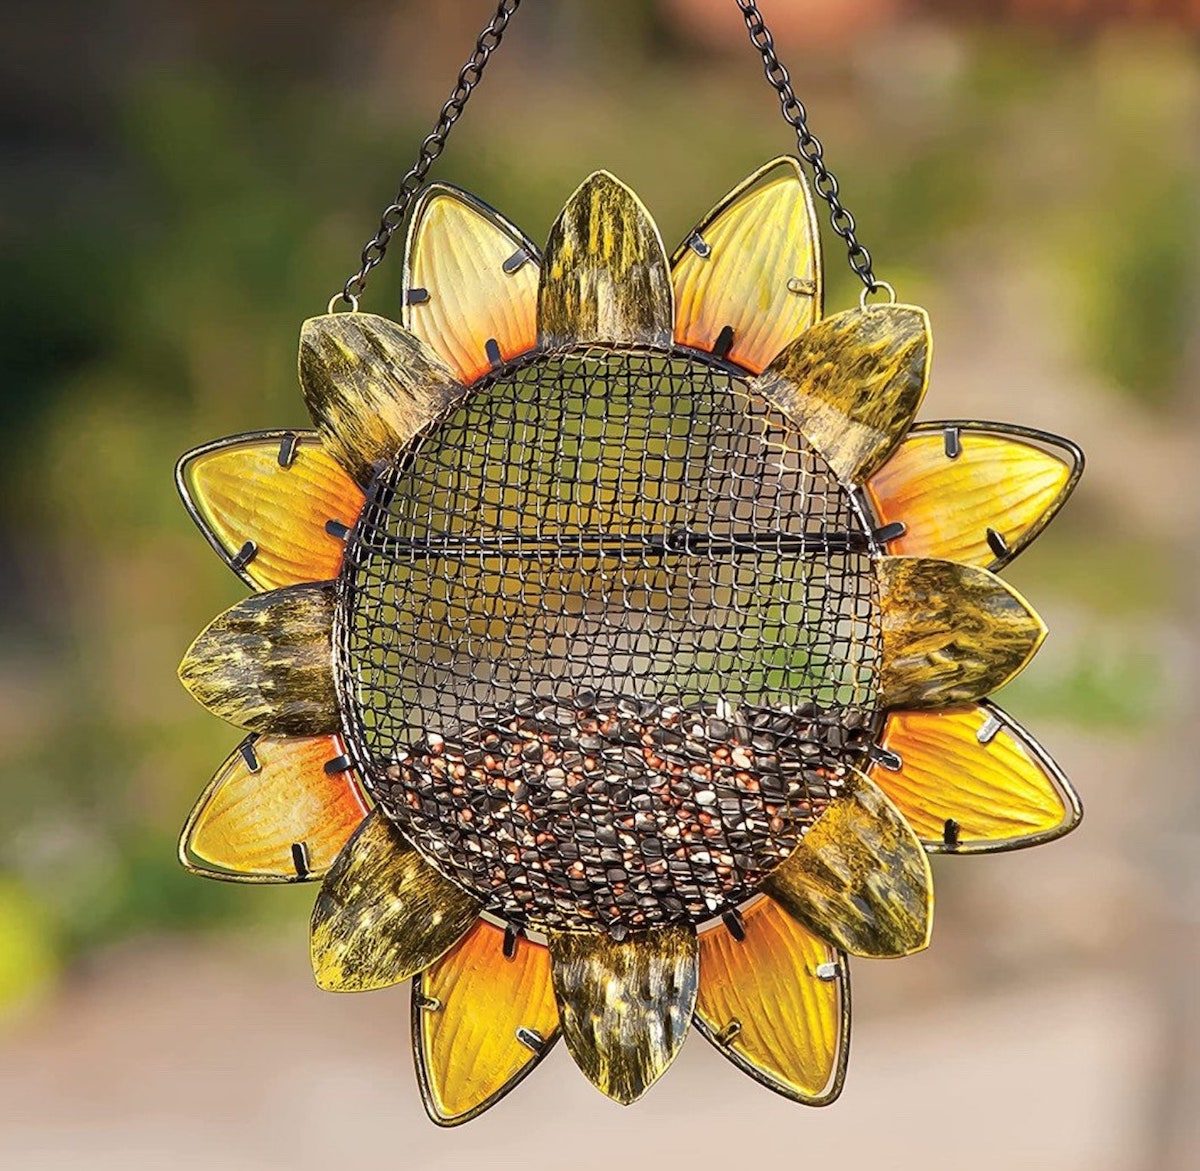 The Best Sunflower Seed Bird Feeders for Your Yard